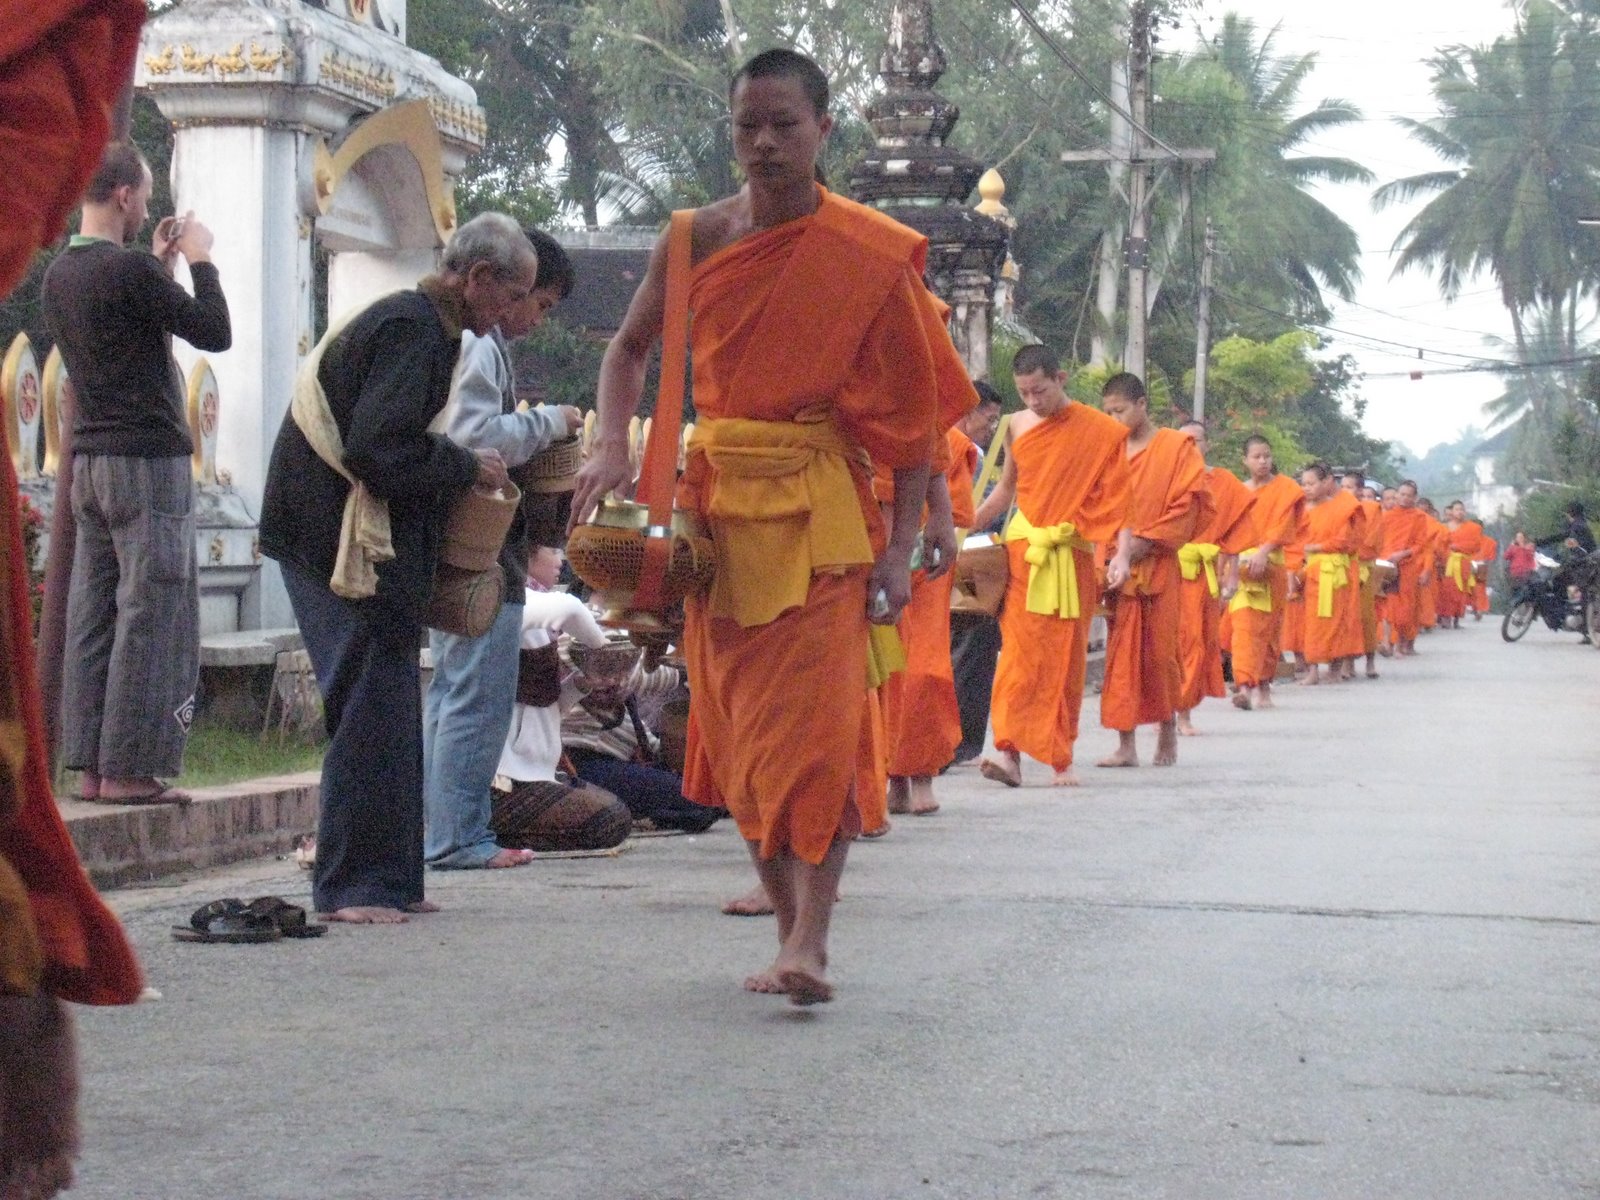 Four of our group woke up at 5:30 this morning and headed into town to participate in morning alms. All of the monks from all the temples in the area […]